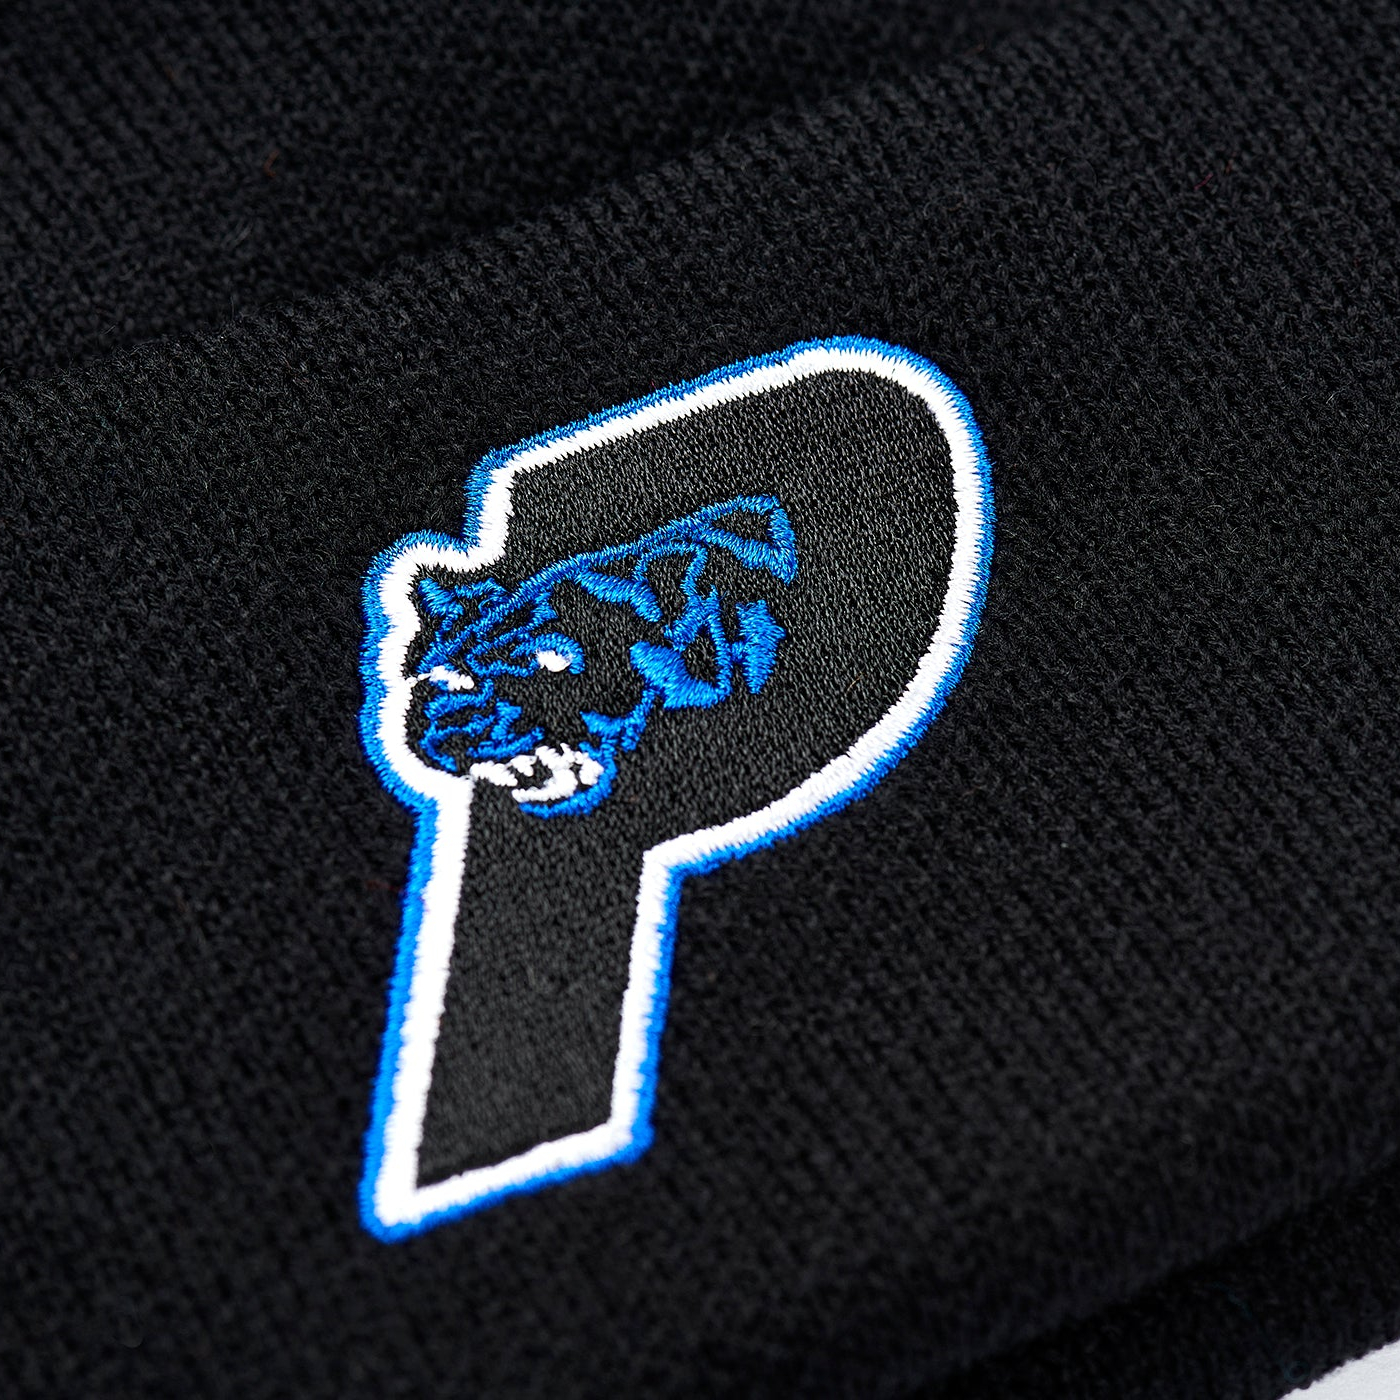 Thumbnail PANTHER BEANIE BLACK one color